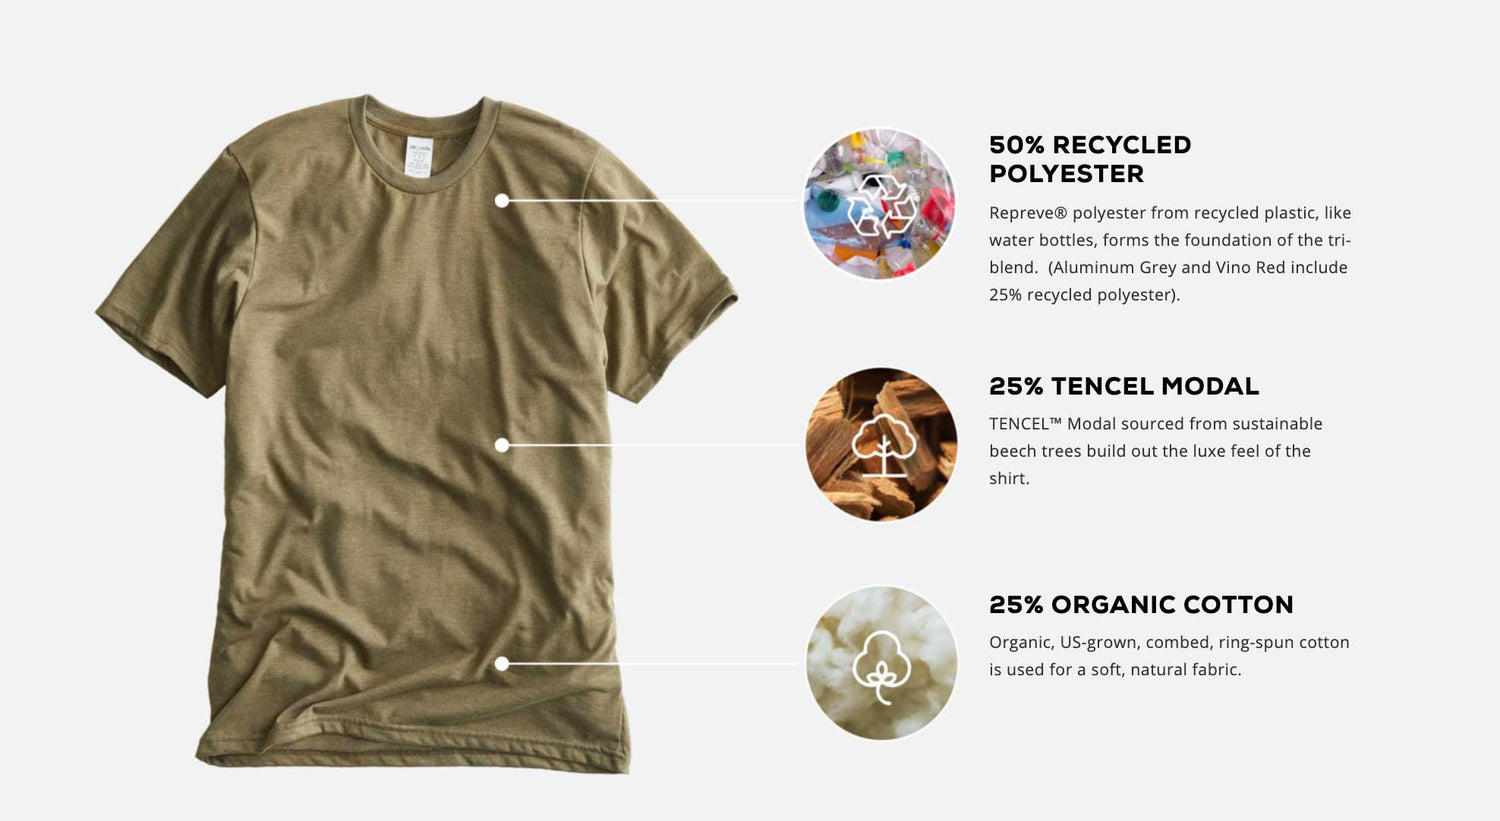 Are There Any Eco-friendly Options For Shirts Made In The USA?